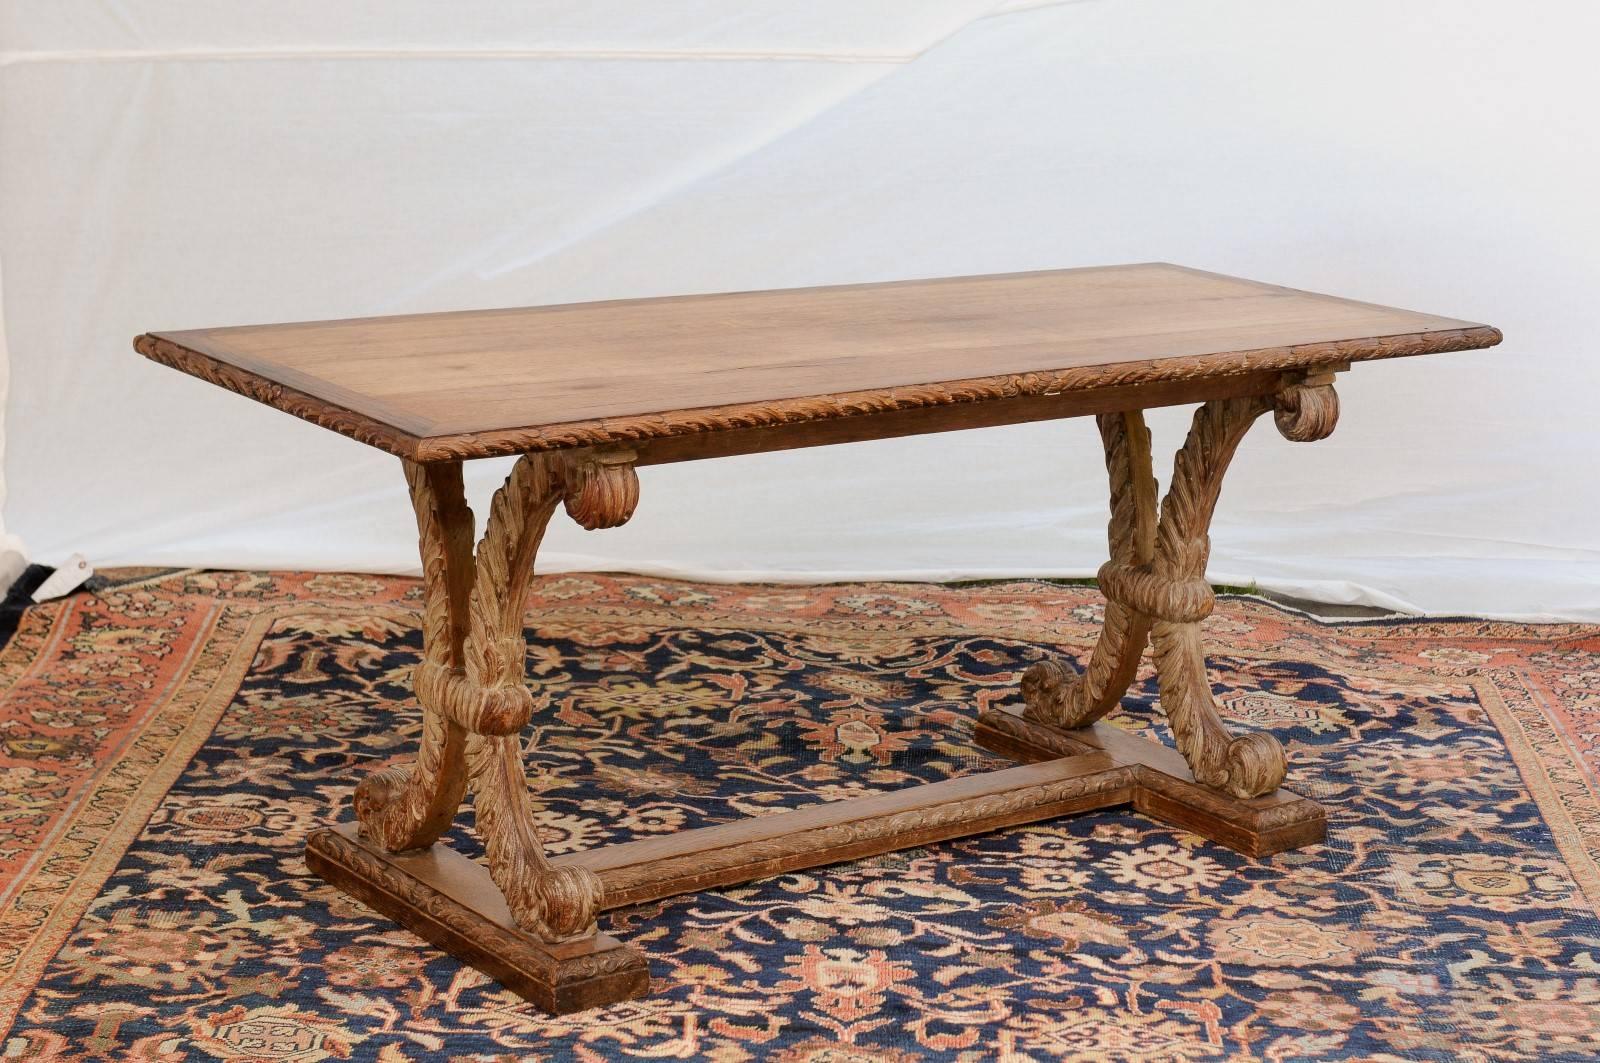 This French sofa table from the turn of the century features a rectangular top surrounded by a delicately carved molding. The top is made of three long planks secured by four wooden strips decorated with carved foliage molding. The top sits on an